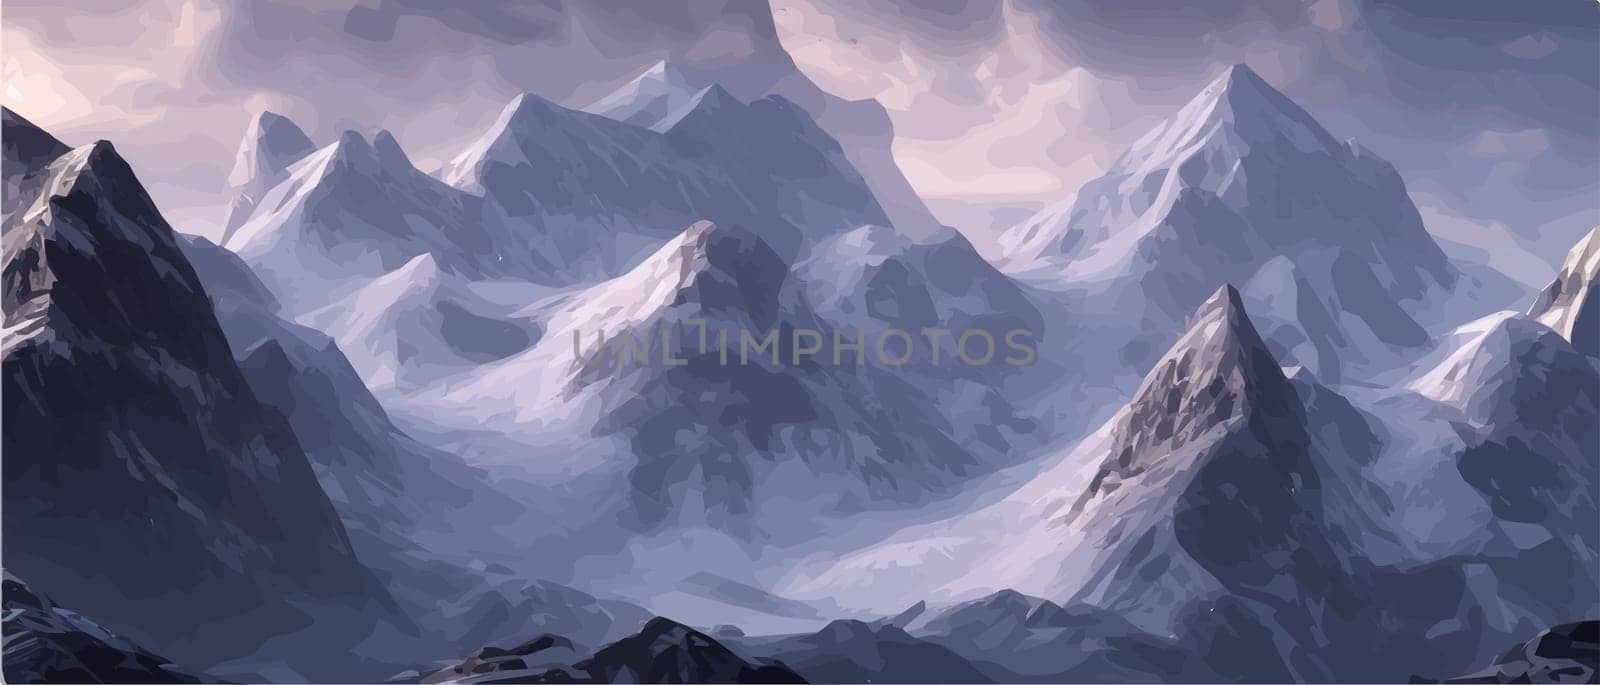 Fantasy epic magic mountain landscape. Mystical winter valley valley , Panoramic view of big mountains . Mountains landscape. Rural nature background. hills horizon